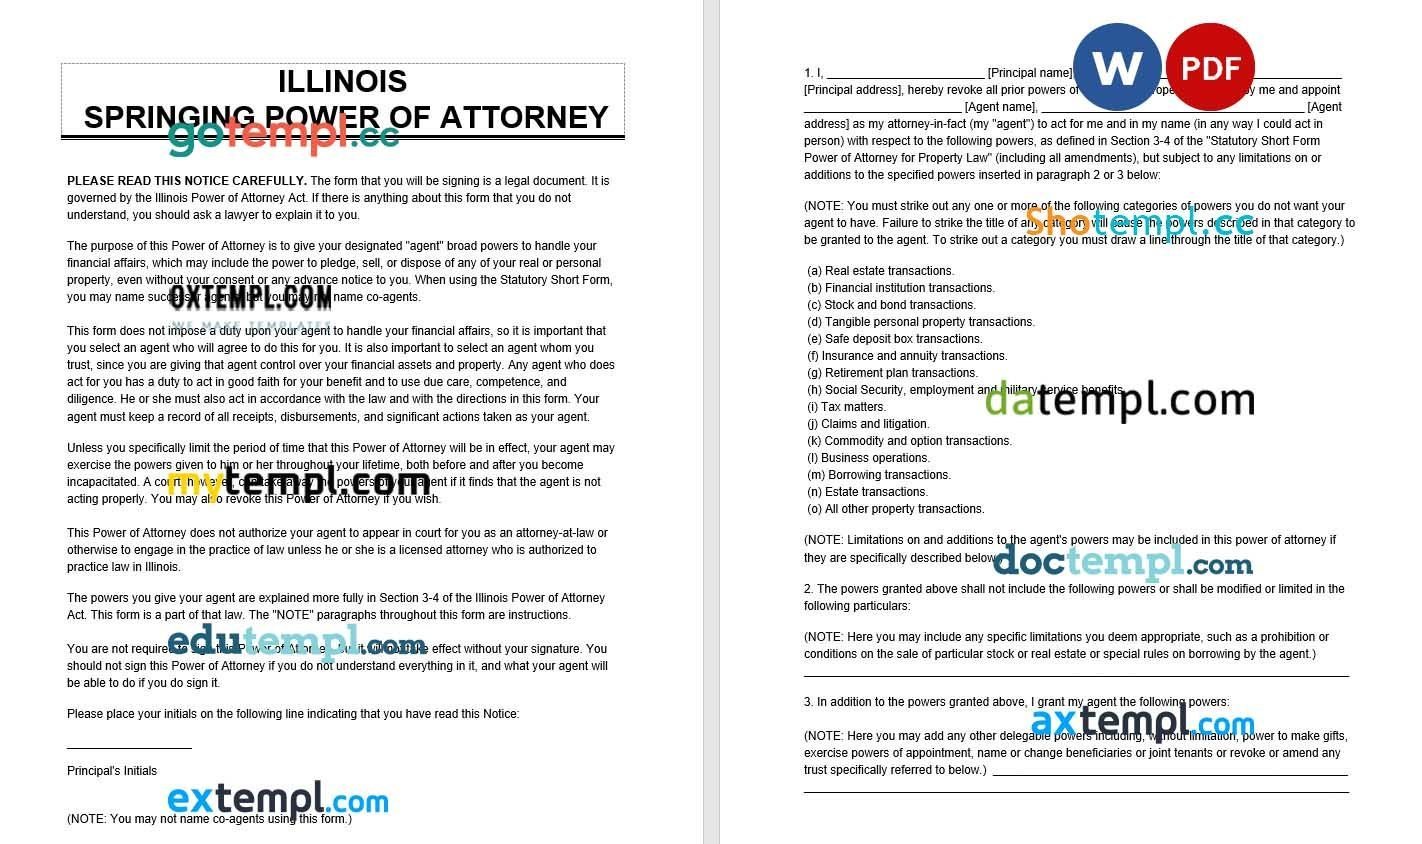 Illinois Springing Power of Attorney example, fully editable